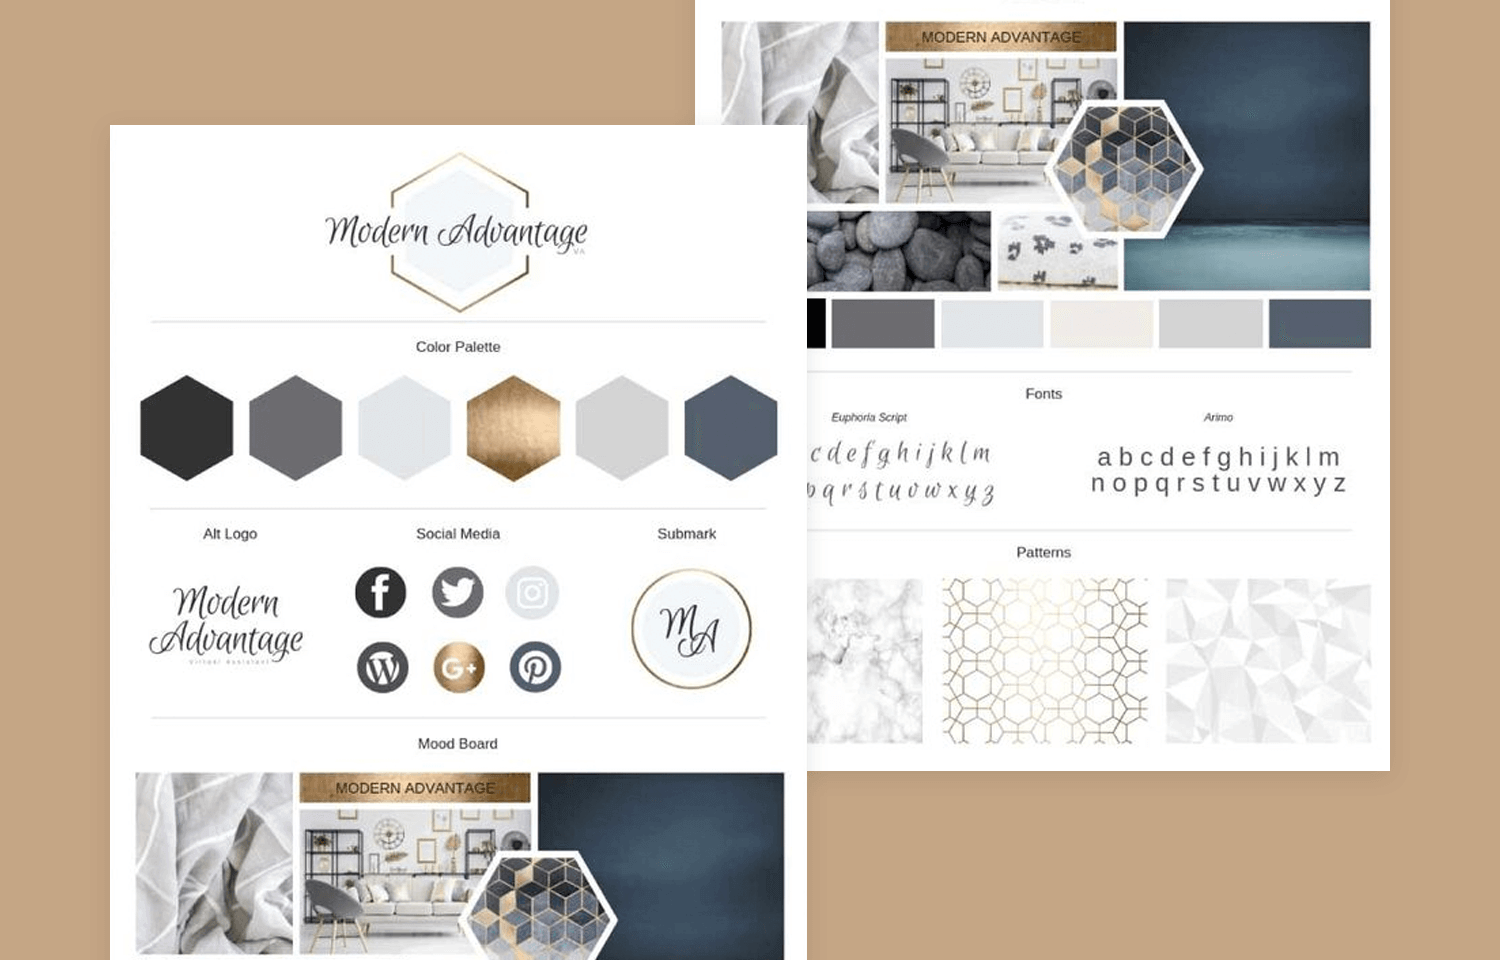 Website mood board examples - modern gold branding with colors and patterns